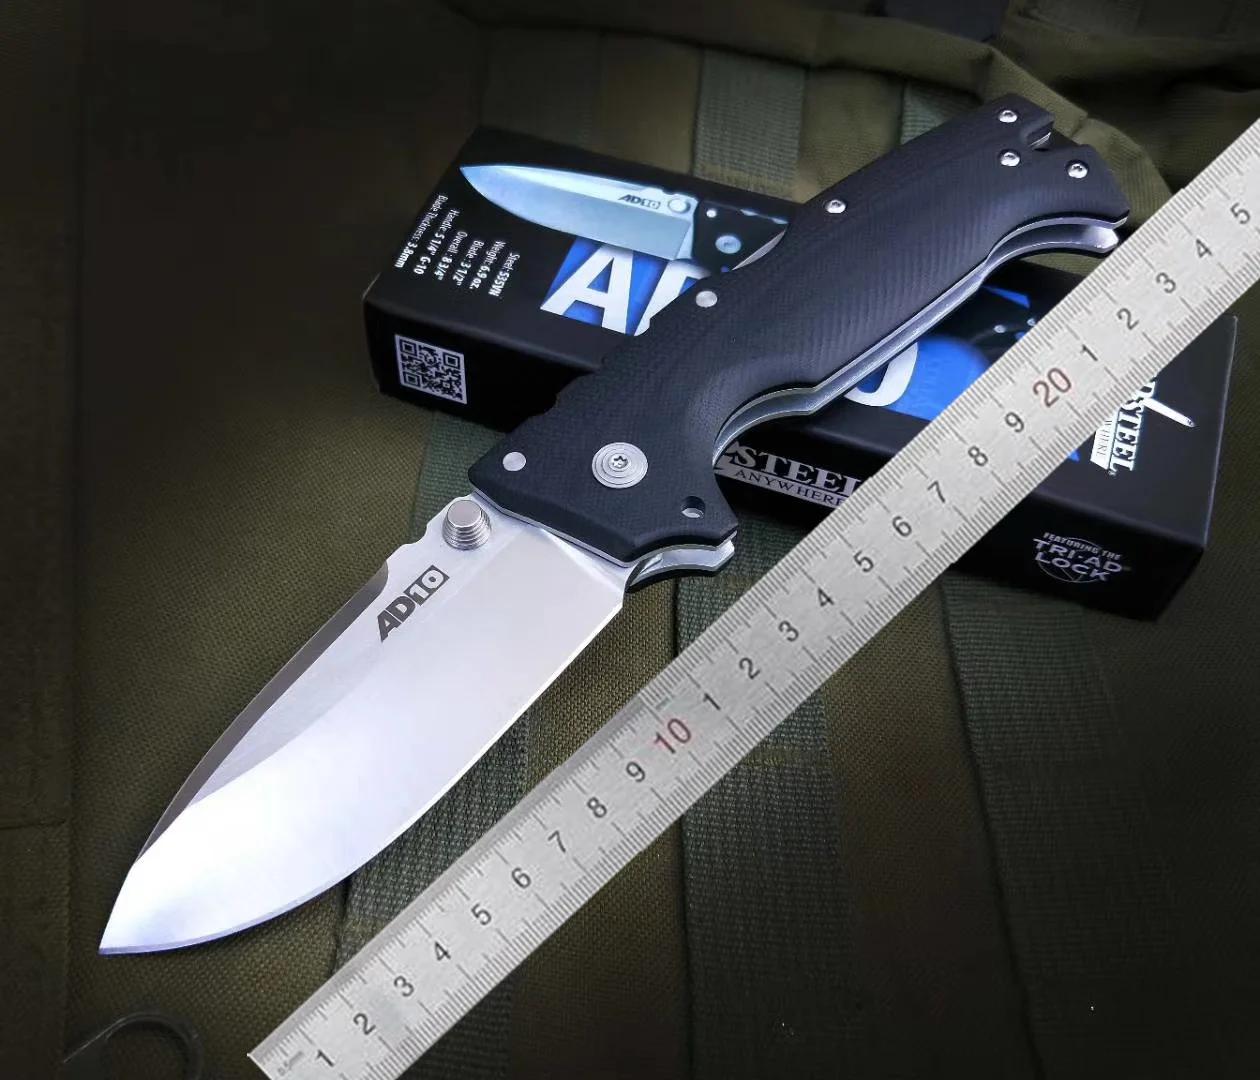 

Cold Steel AD10 Outdoor camping Survival Folding Knife S35VN blade G10 handle High hardness sharp EDC tactical folding knife EDC